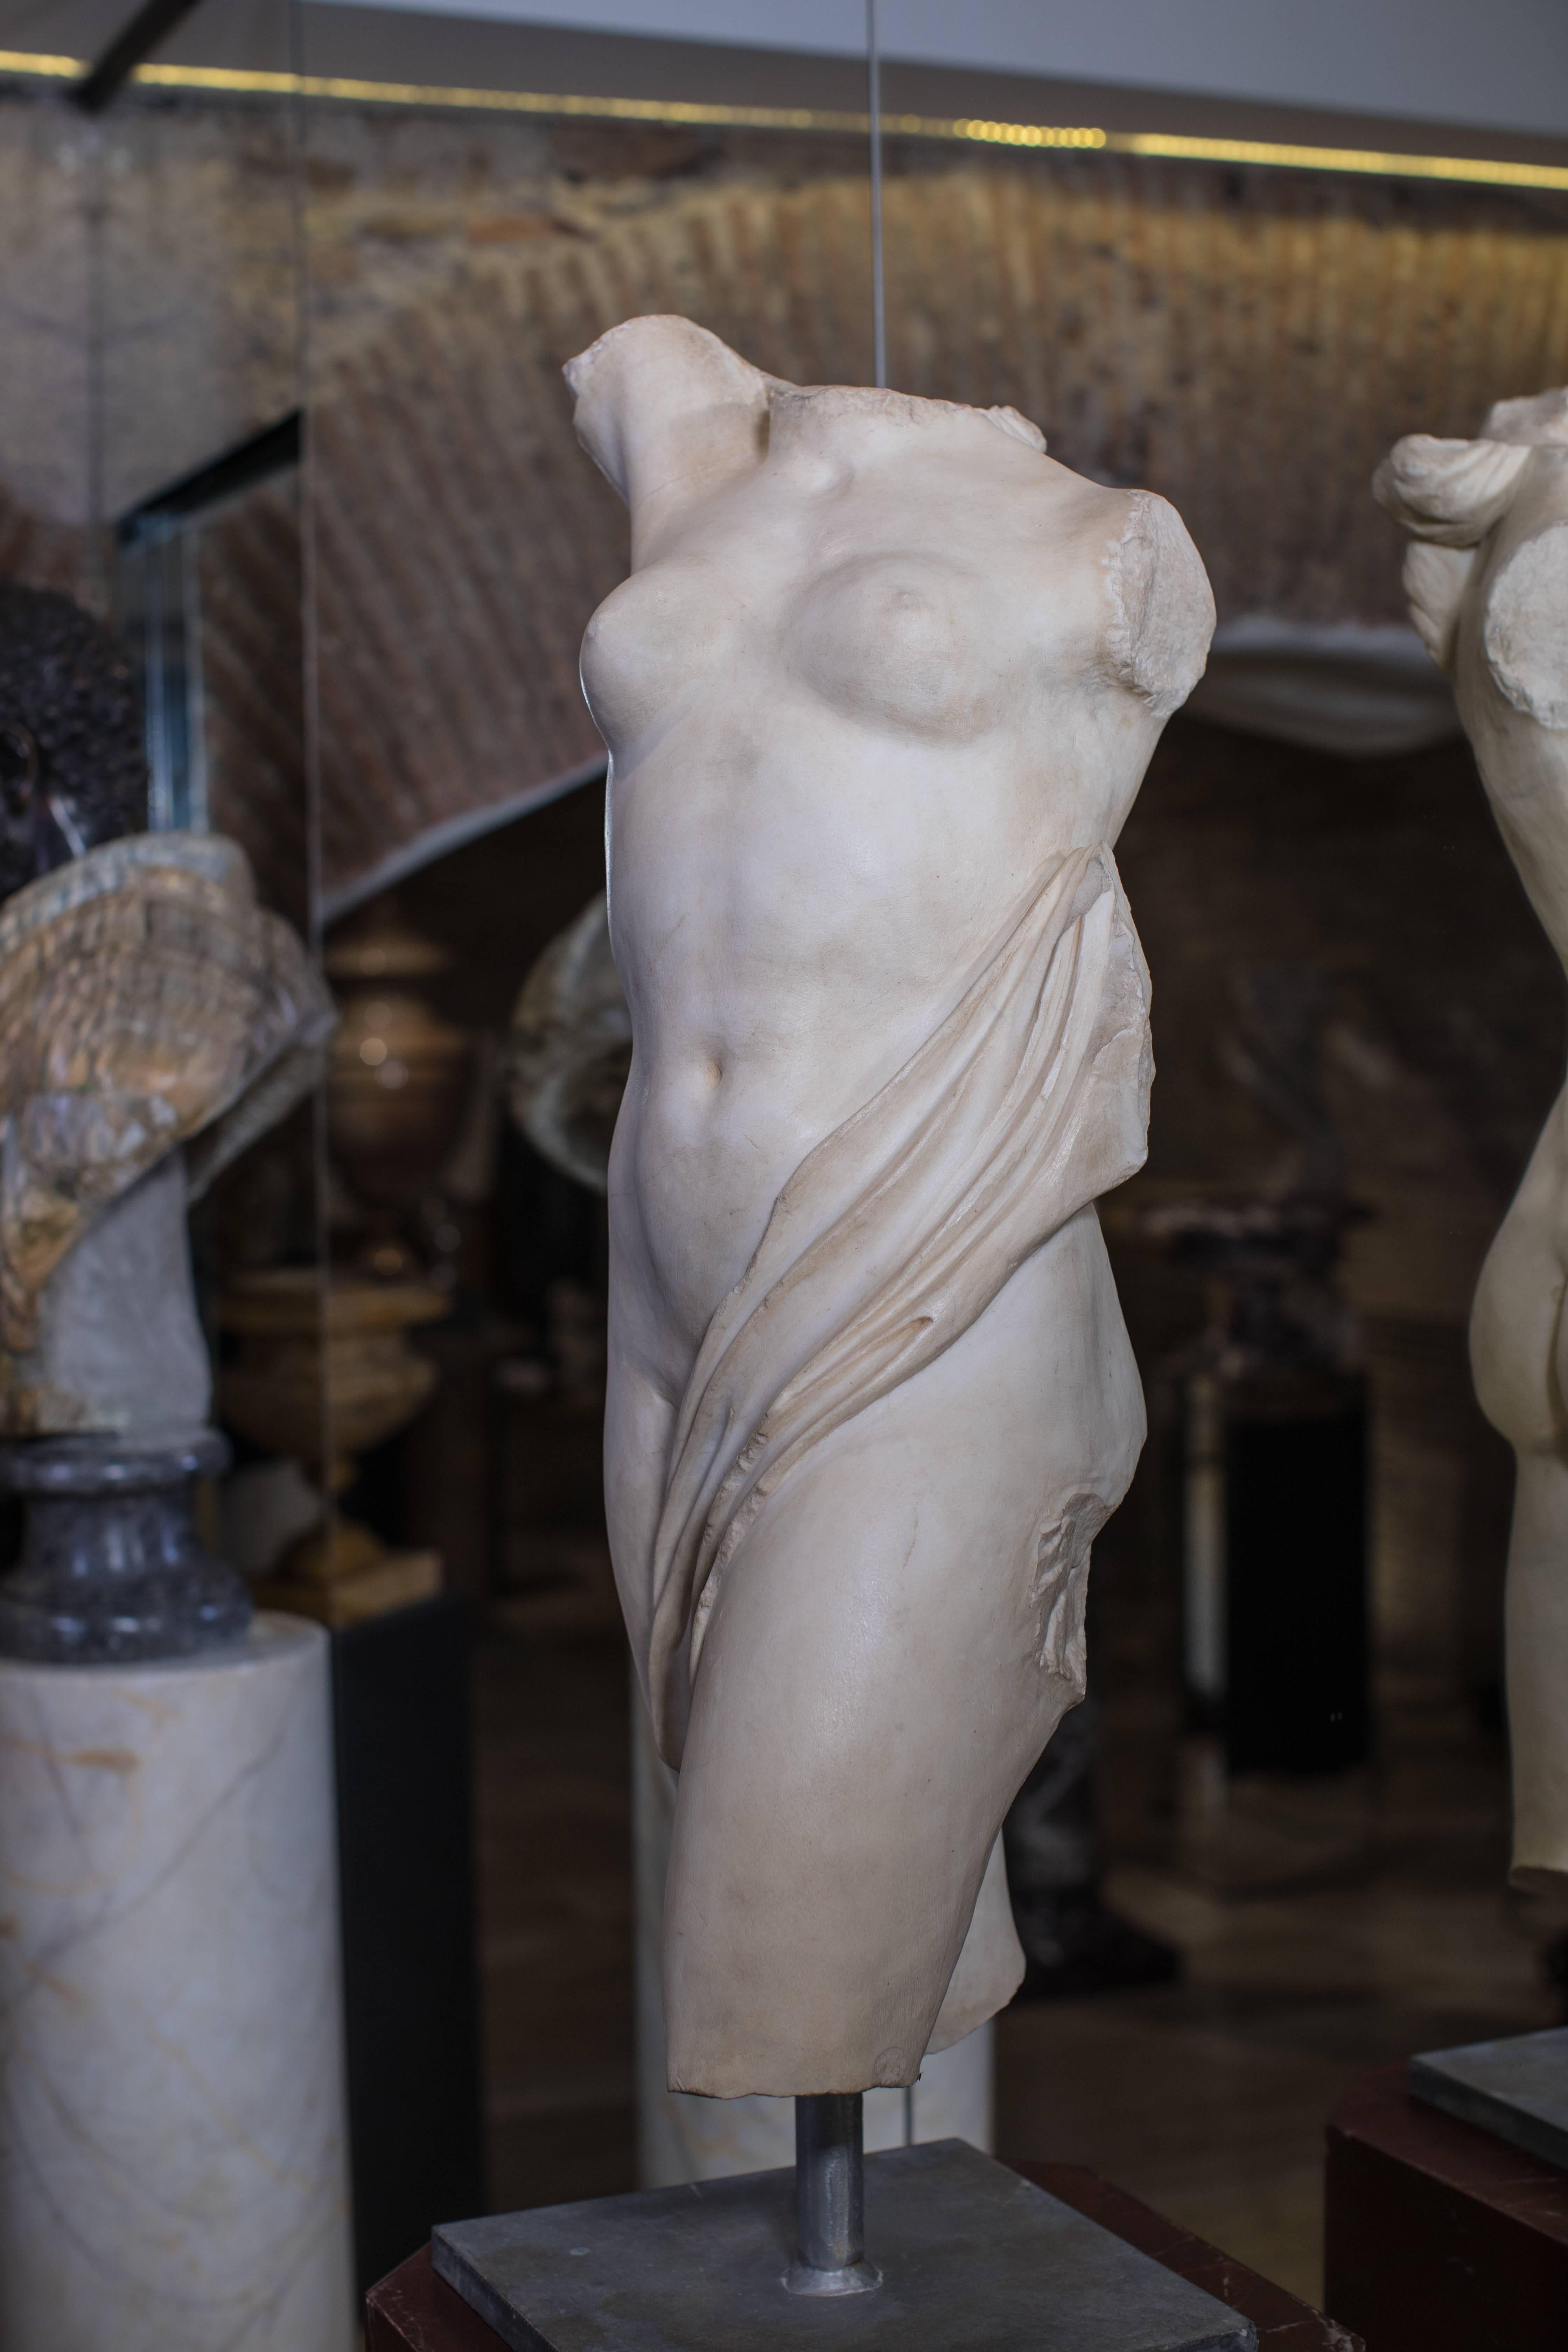 A superb torso of woman, carved in white marble and aged as after the classical roman style. The collection named once were romans, propose a selection of object and work of art focused on Classical Roman time, reclaim the heritage the taste of